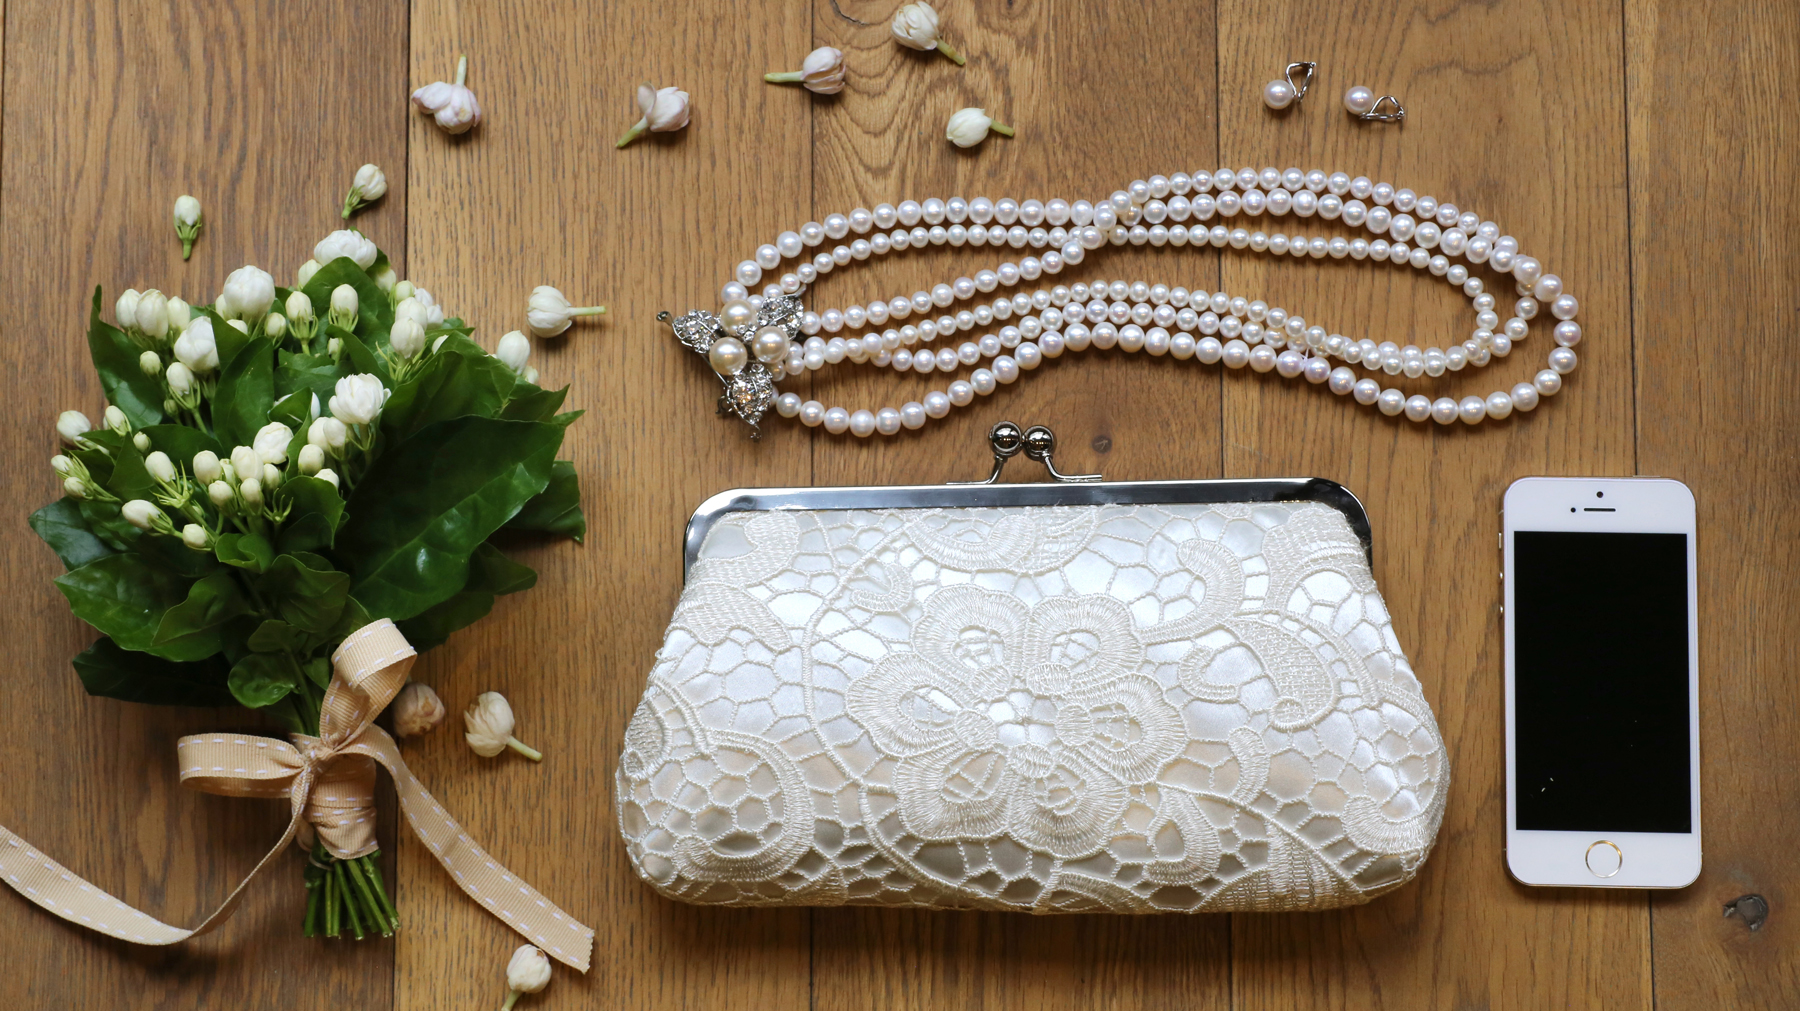 Bridal lace clutch bag (ivory lace) fits iphone and bridal necessities ANGEE W. handmade